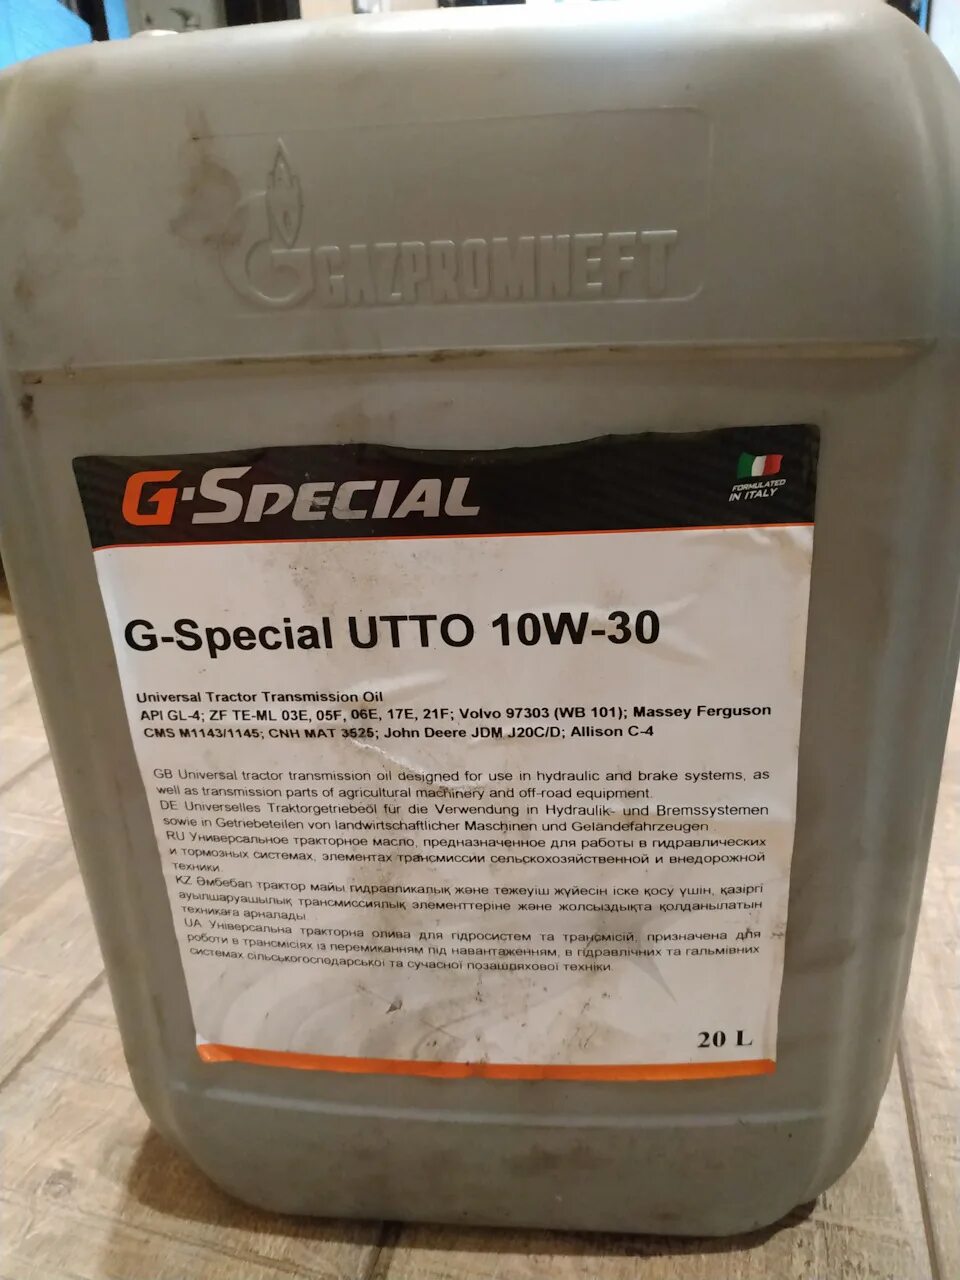 Масло utto 10w. G-Special UTTO 10w-30. Масло гидравлическое g-Special UTTO 10w30. Масло g-Special UTTO 10w-30 плотность. Масло UTTO 10w30.